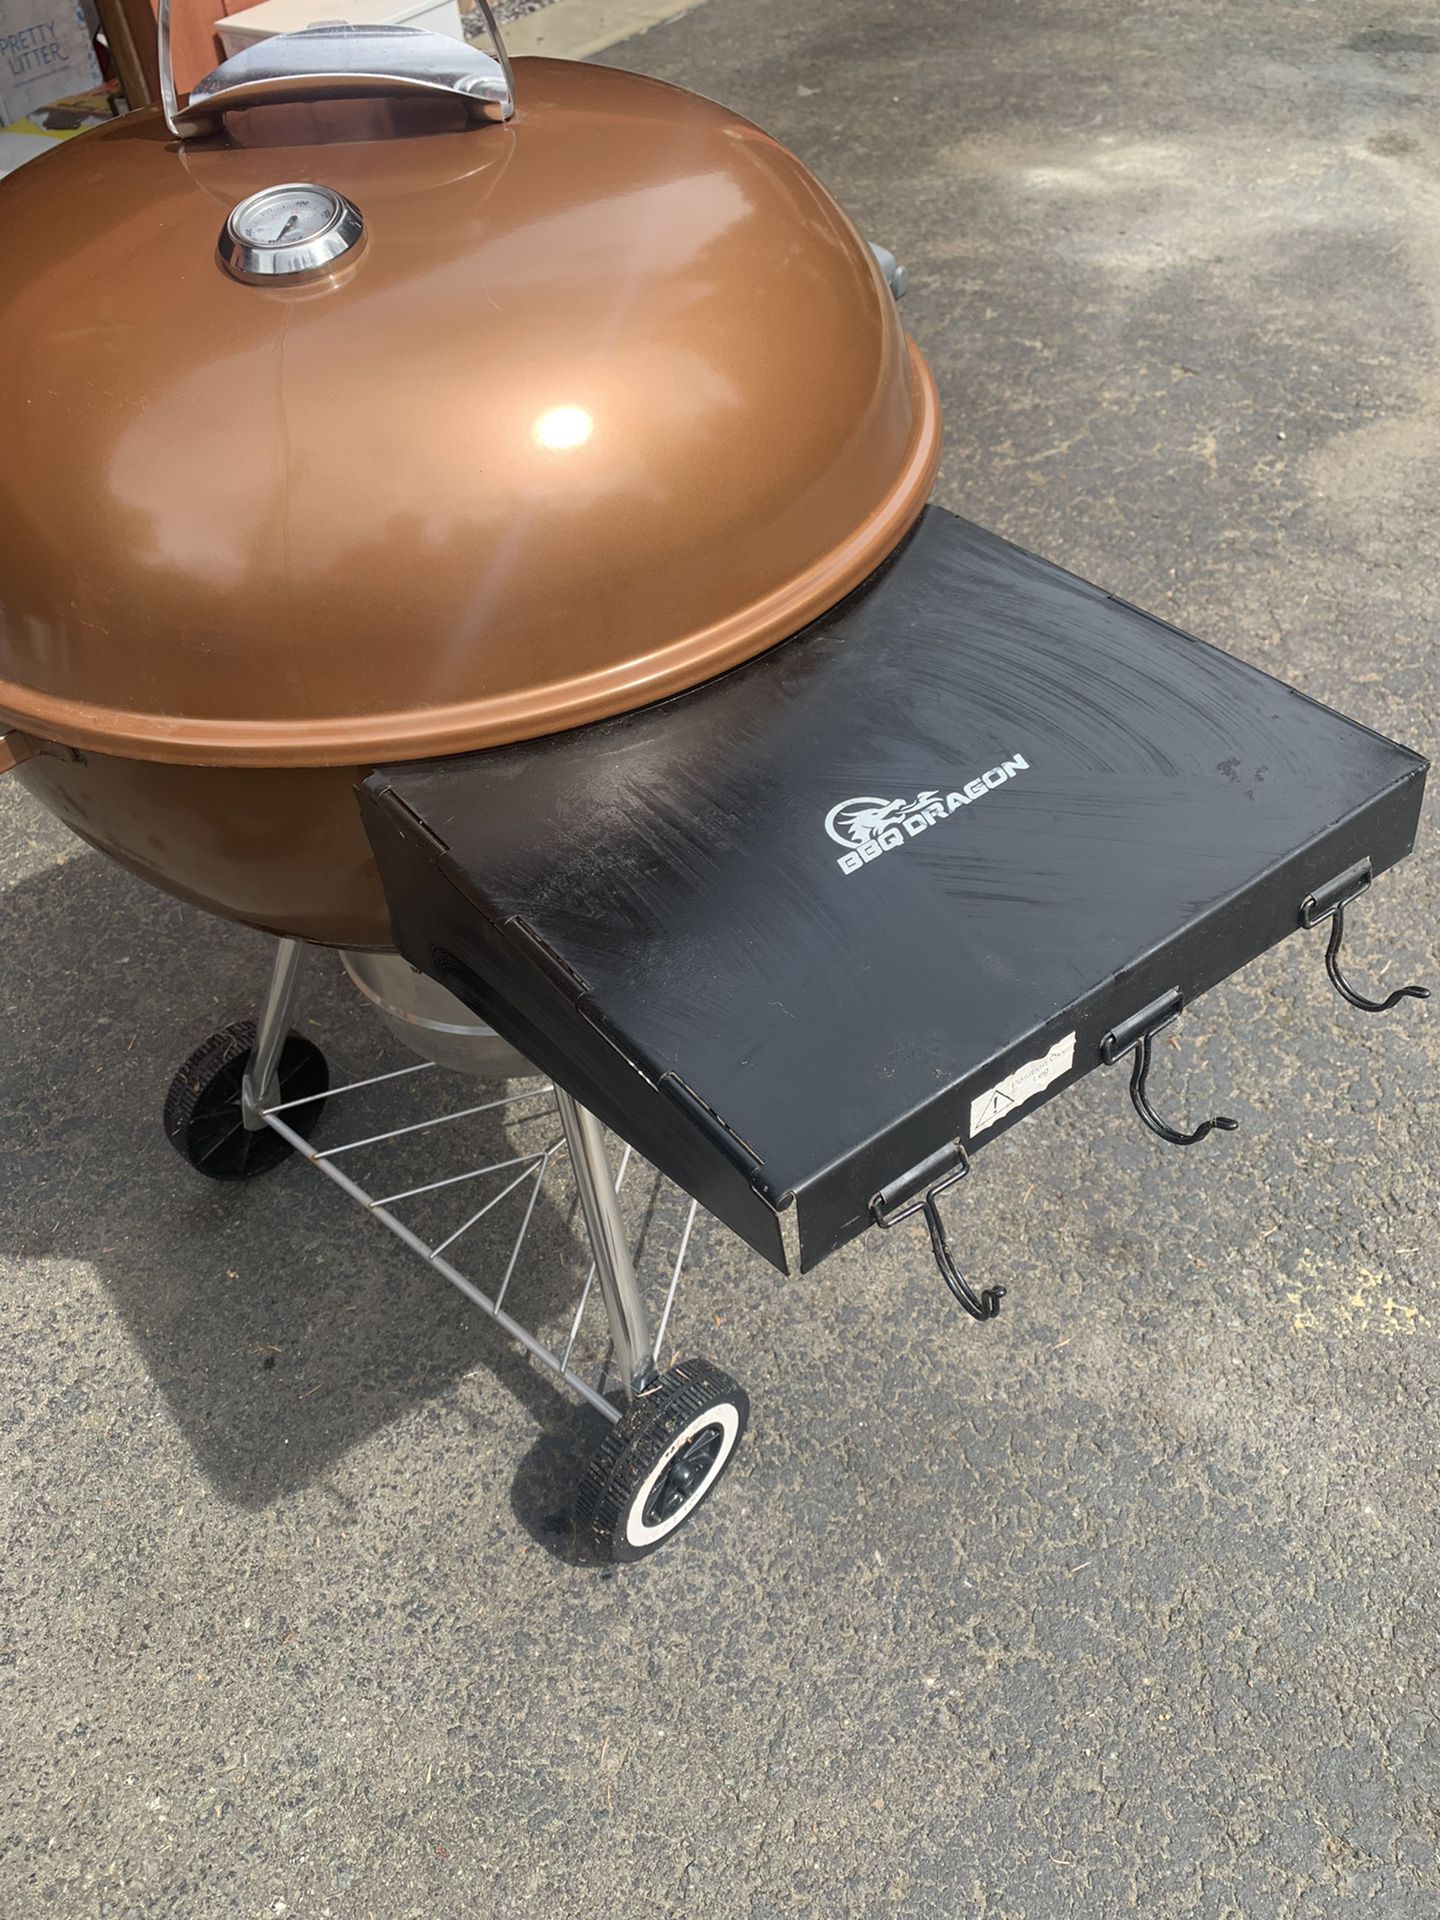 Weber Connect Smart Grilling Hub for Sale in Hesperia, CA - OfferUp